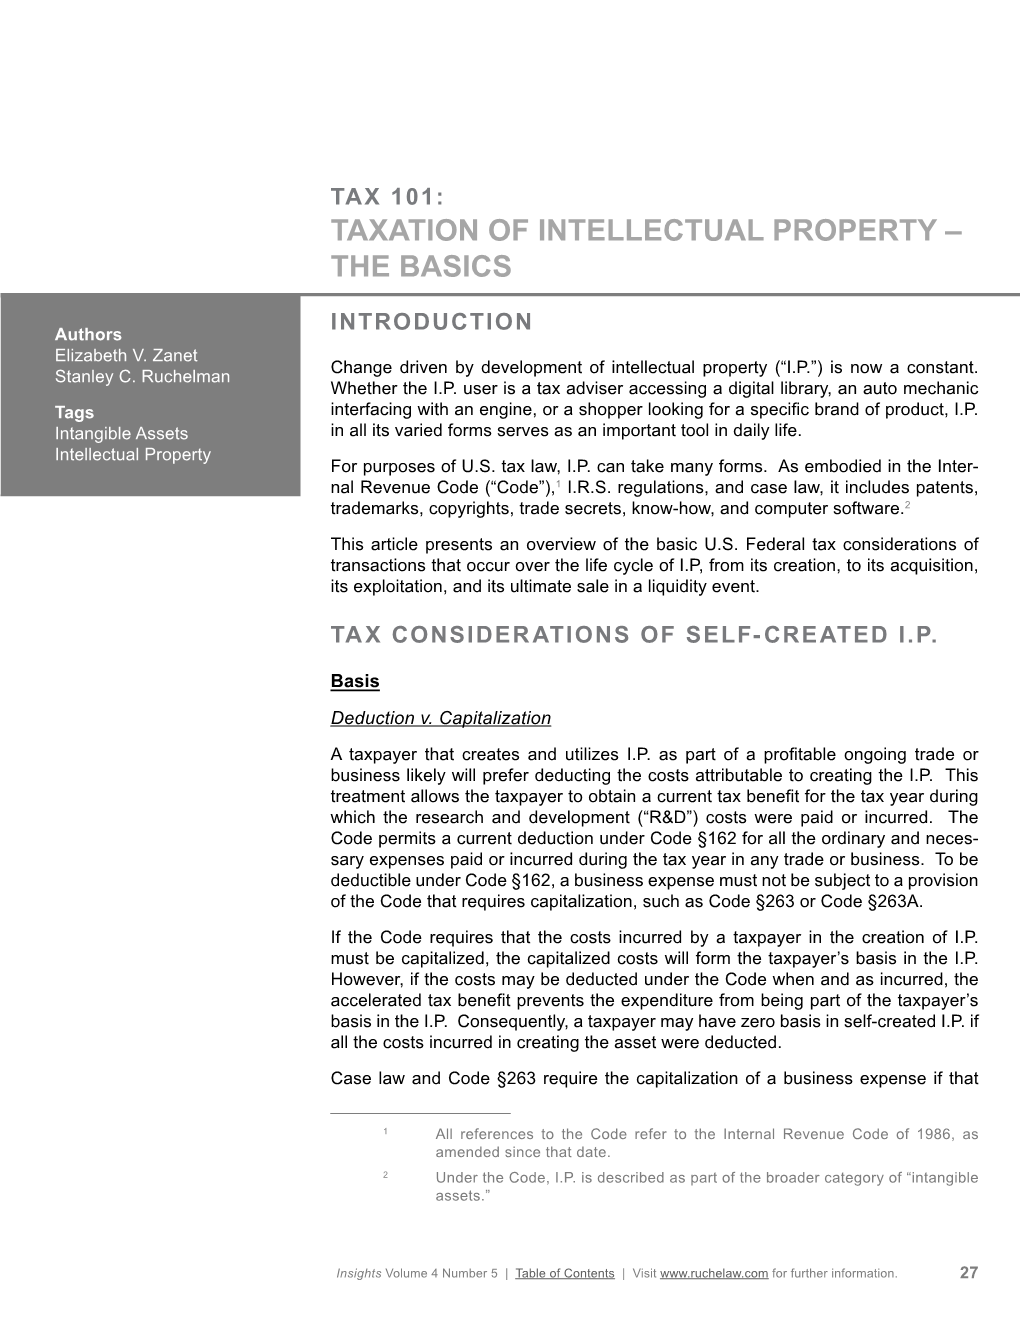 Tax 101: Taxation of Intellectual Property – the Basics